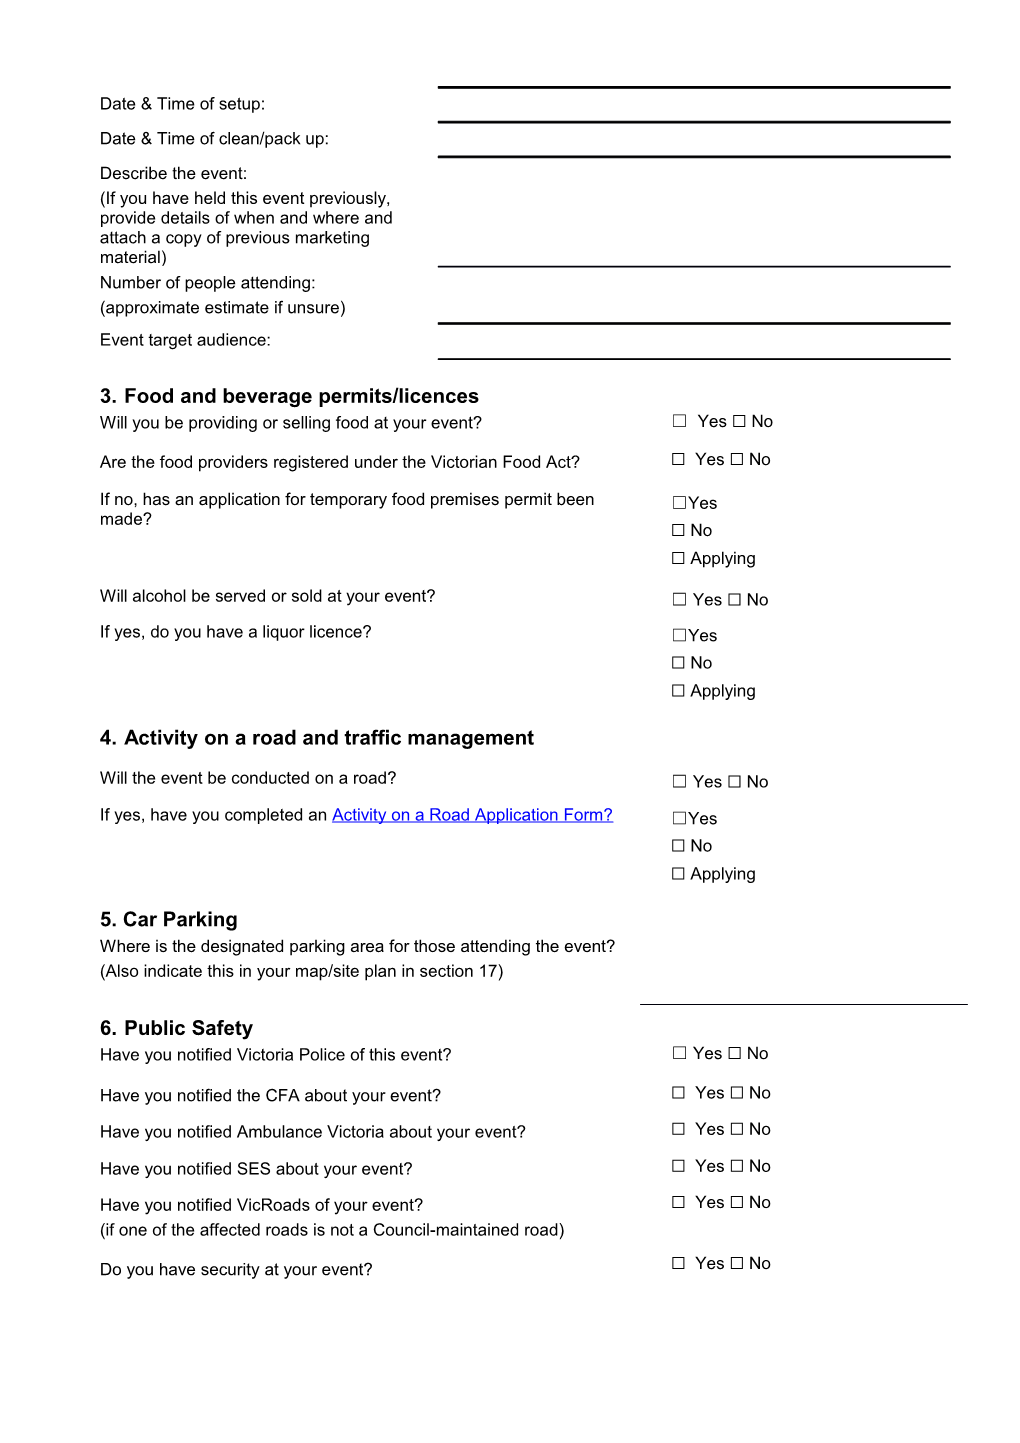 Proposed Event Notification Form